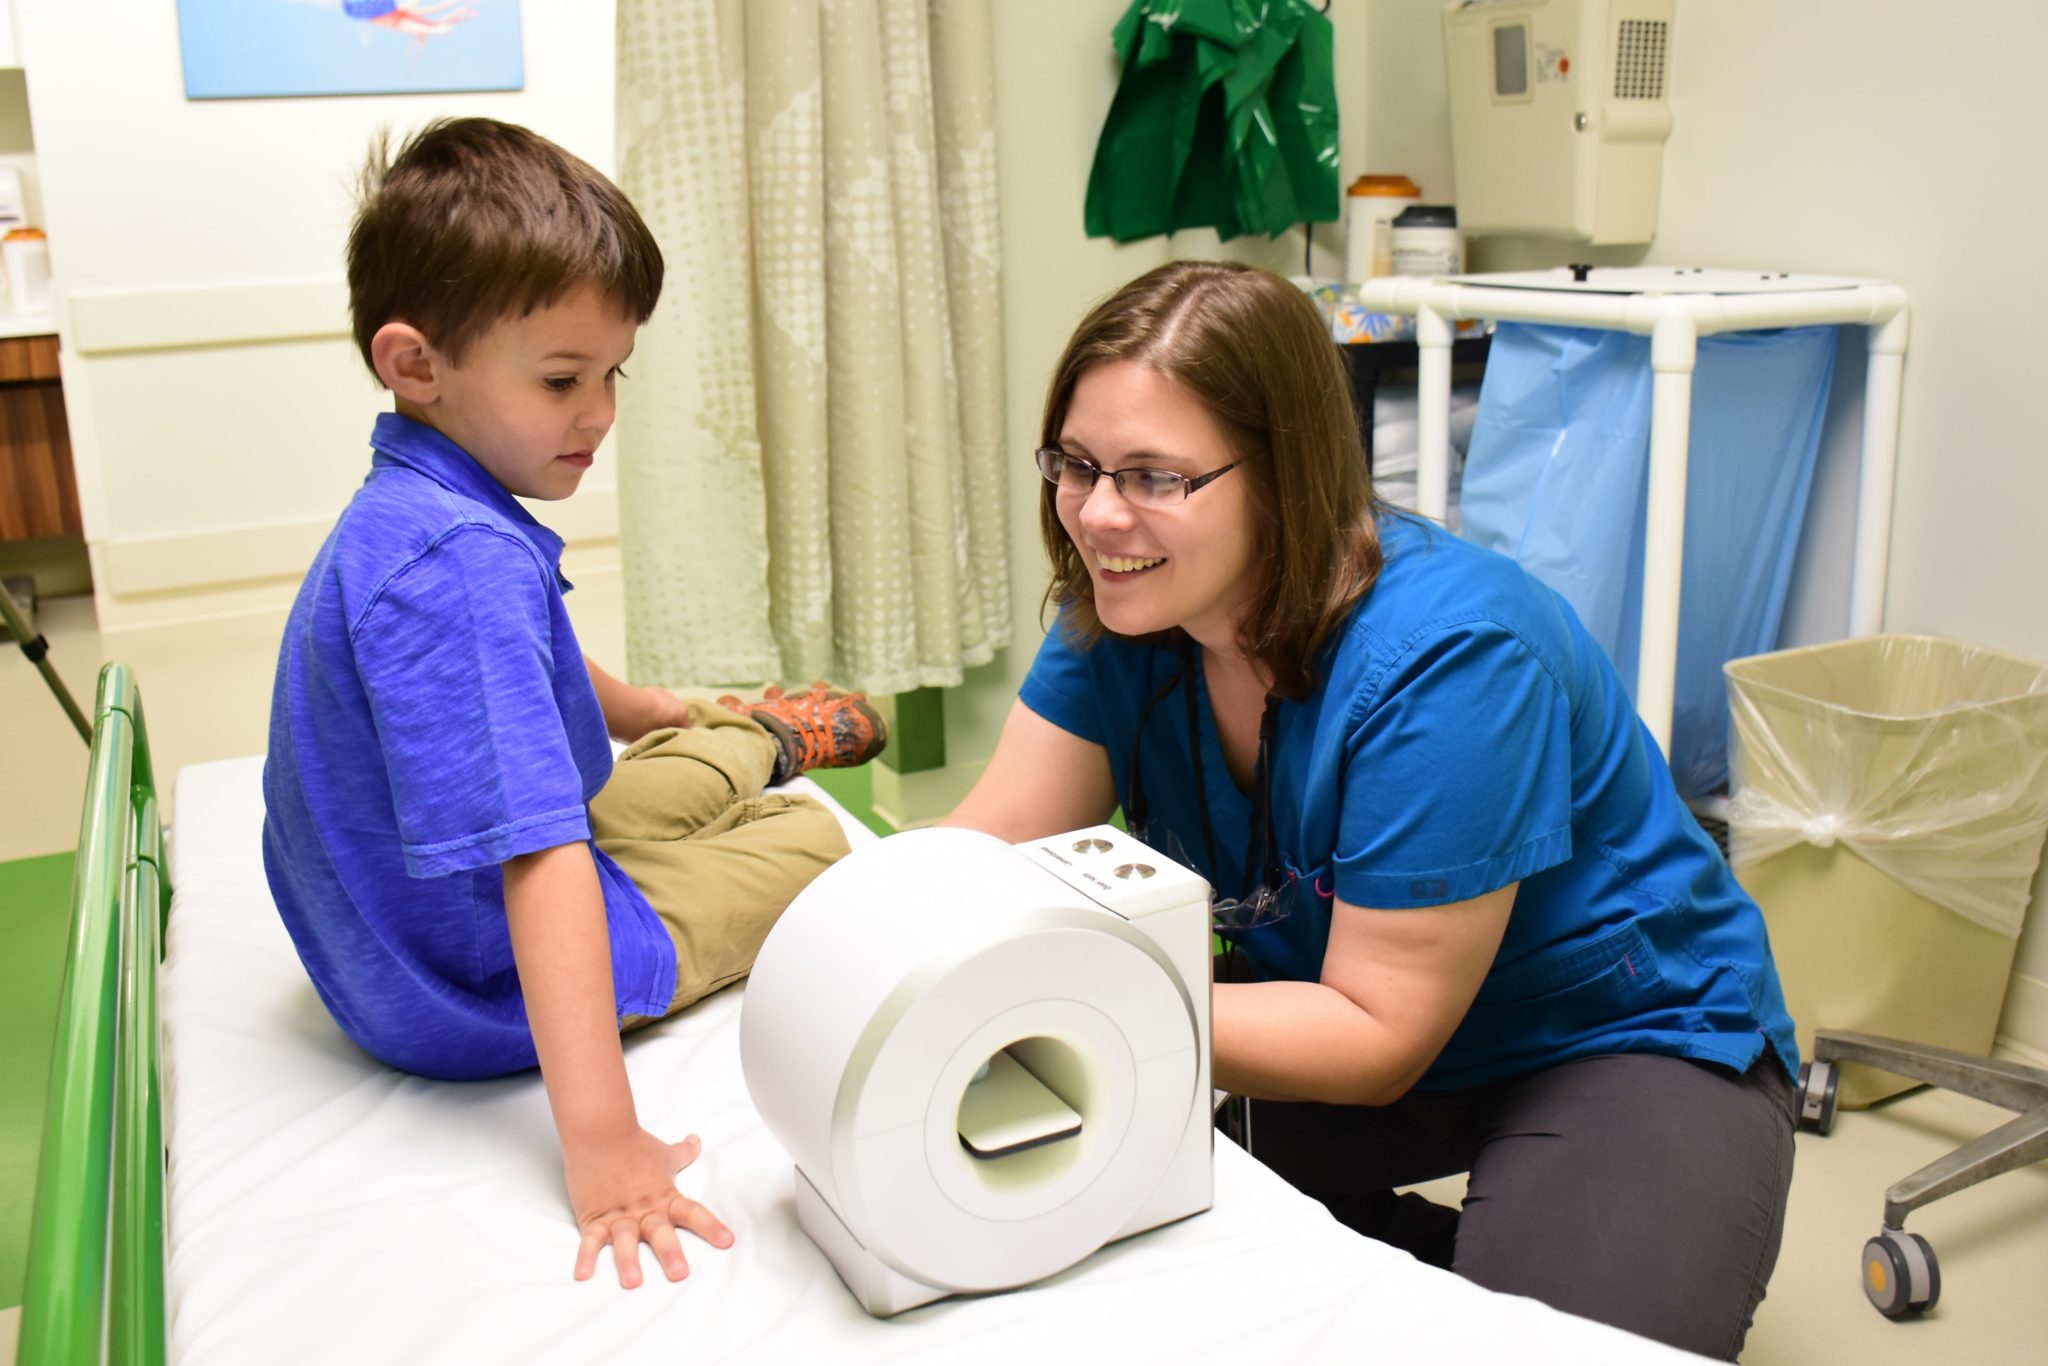 A boy sits in a waiting room as a technician explains how an MRI works using a toy man and a toy MRI